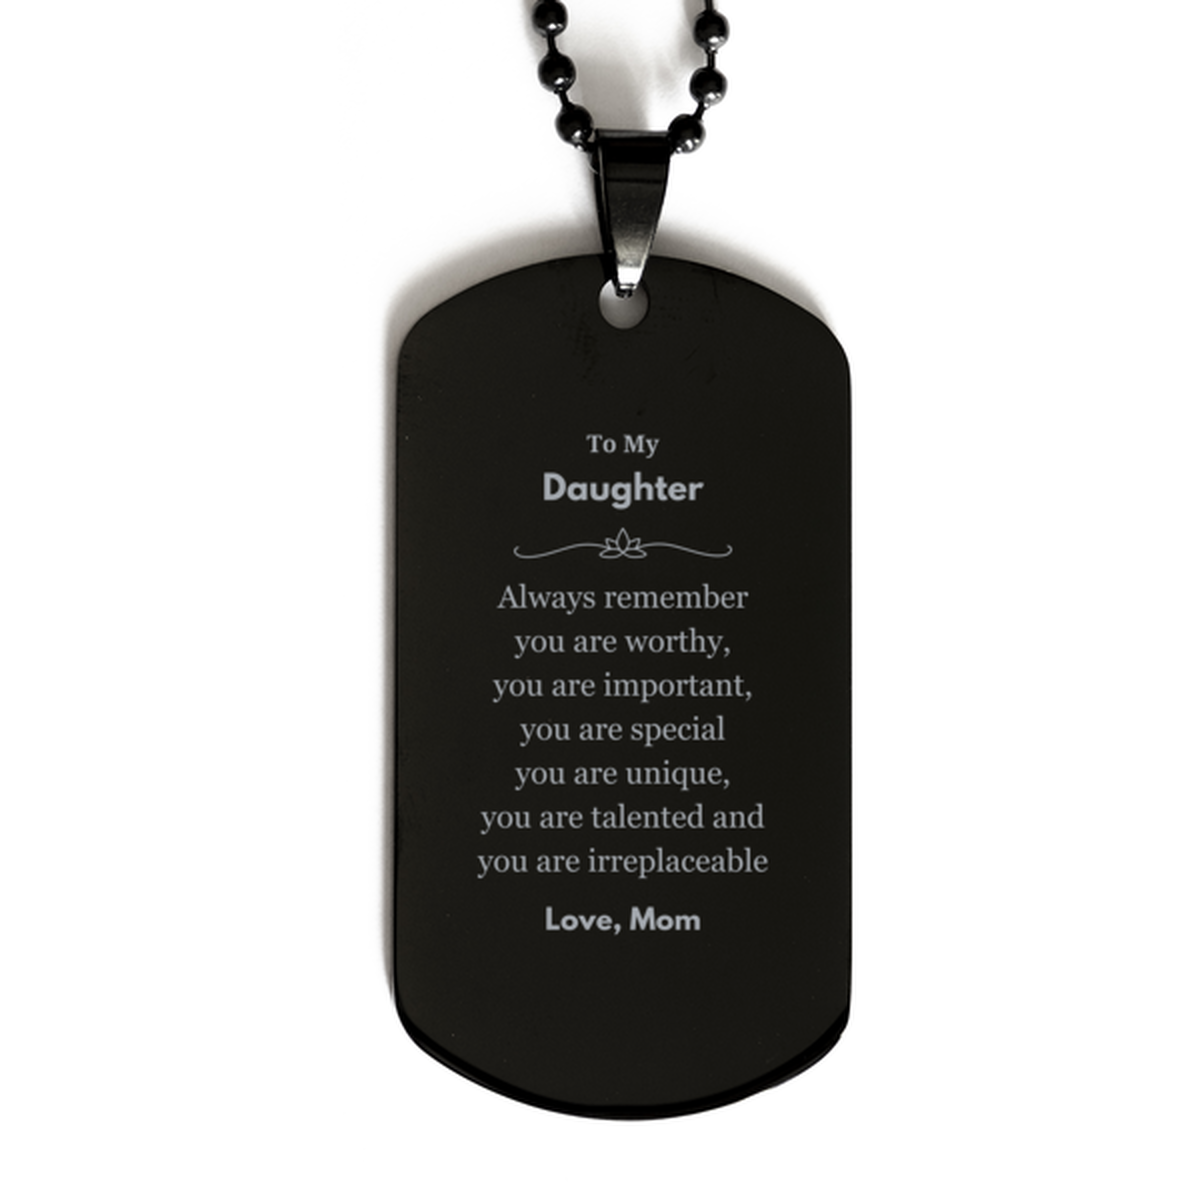 Daughter Birthday Gifts from Mom, Inspirational Black Dog Tag for Daughter Christmas Graduation Gifts for Daughter Always remember you are worthy, you are important. Love, Mom